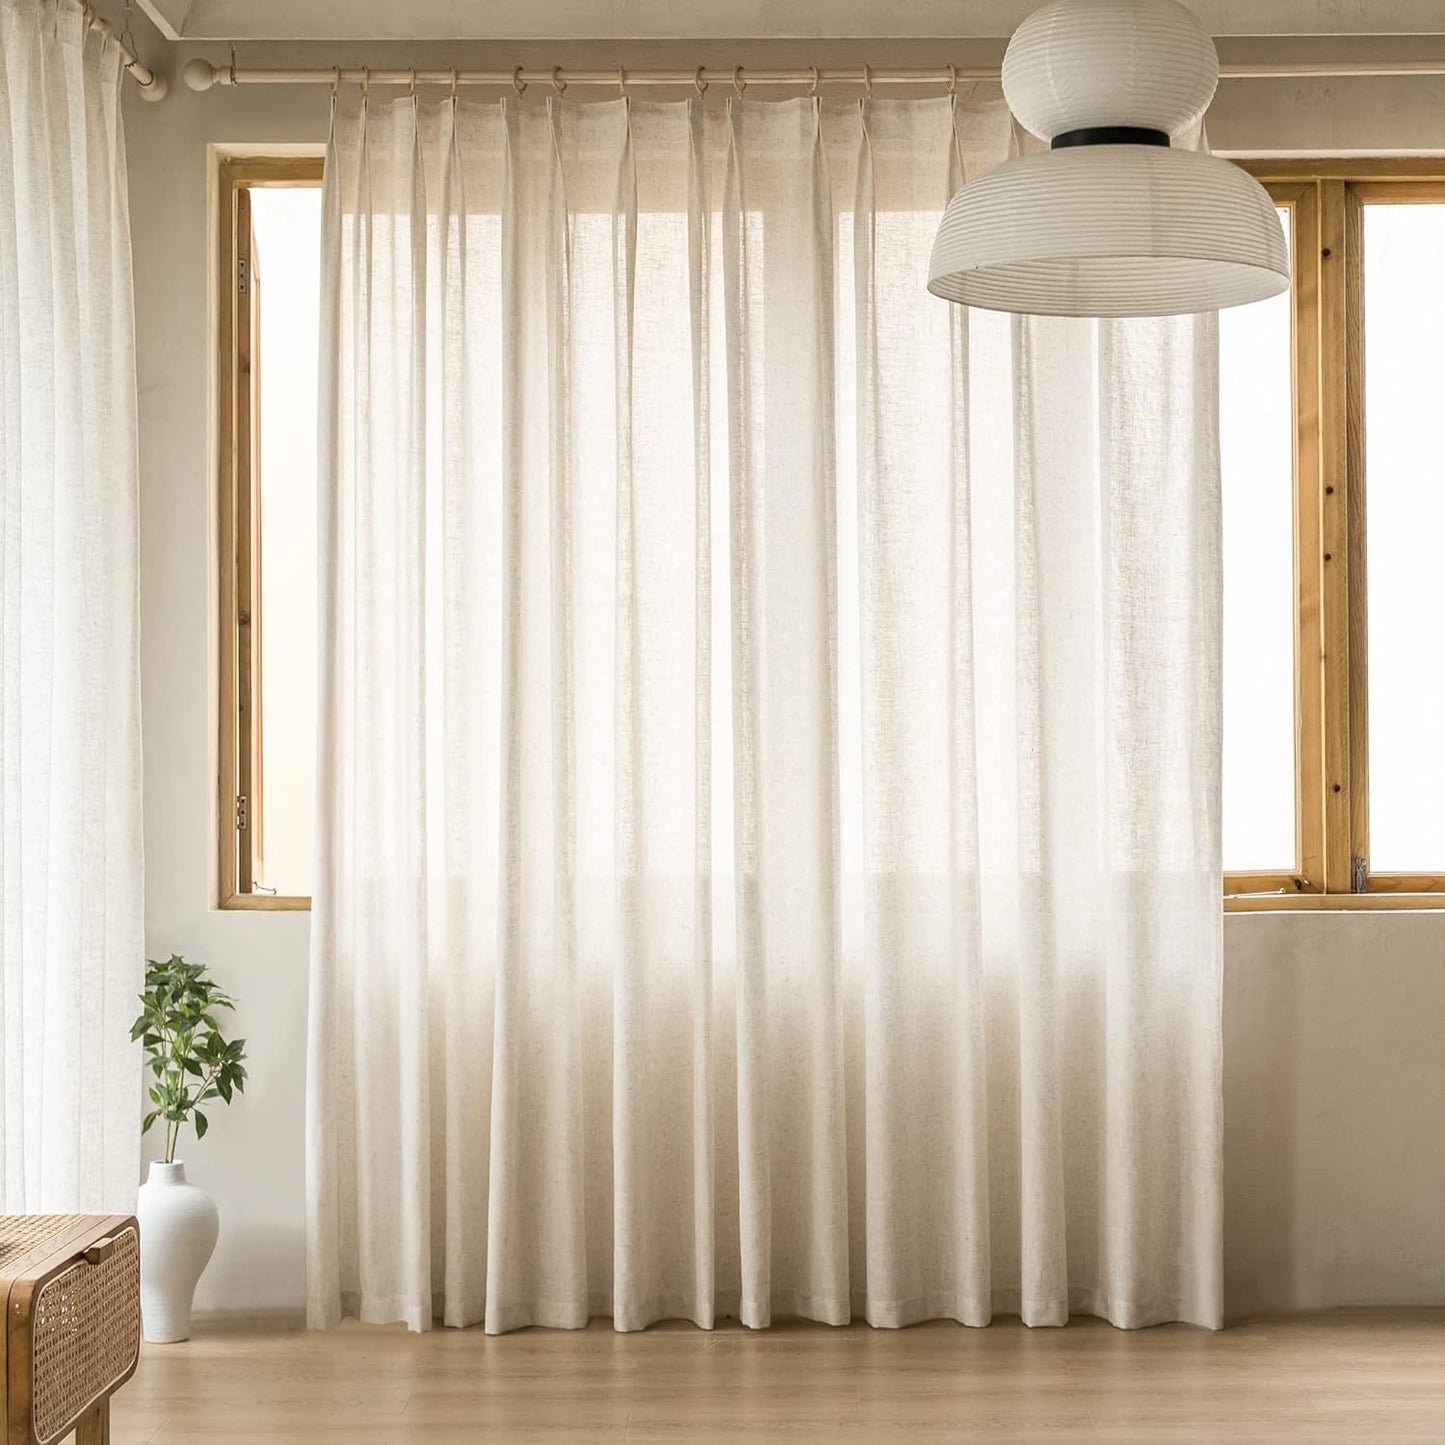 MAIHER Extra Wide Faux Linen Curtains Pinch Pleated, 108 Inches Long Light Filtering Semi Sheer Curtains Patio Door for Living Room, Pinch Pleat Drapes with Hooks (1 Panel, 84" W X 108" L)  MAIHER Linen 54X96 